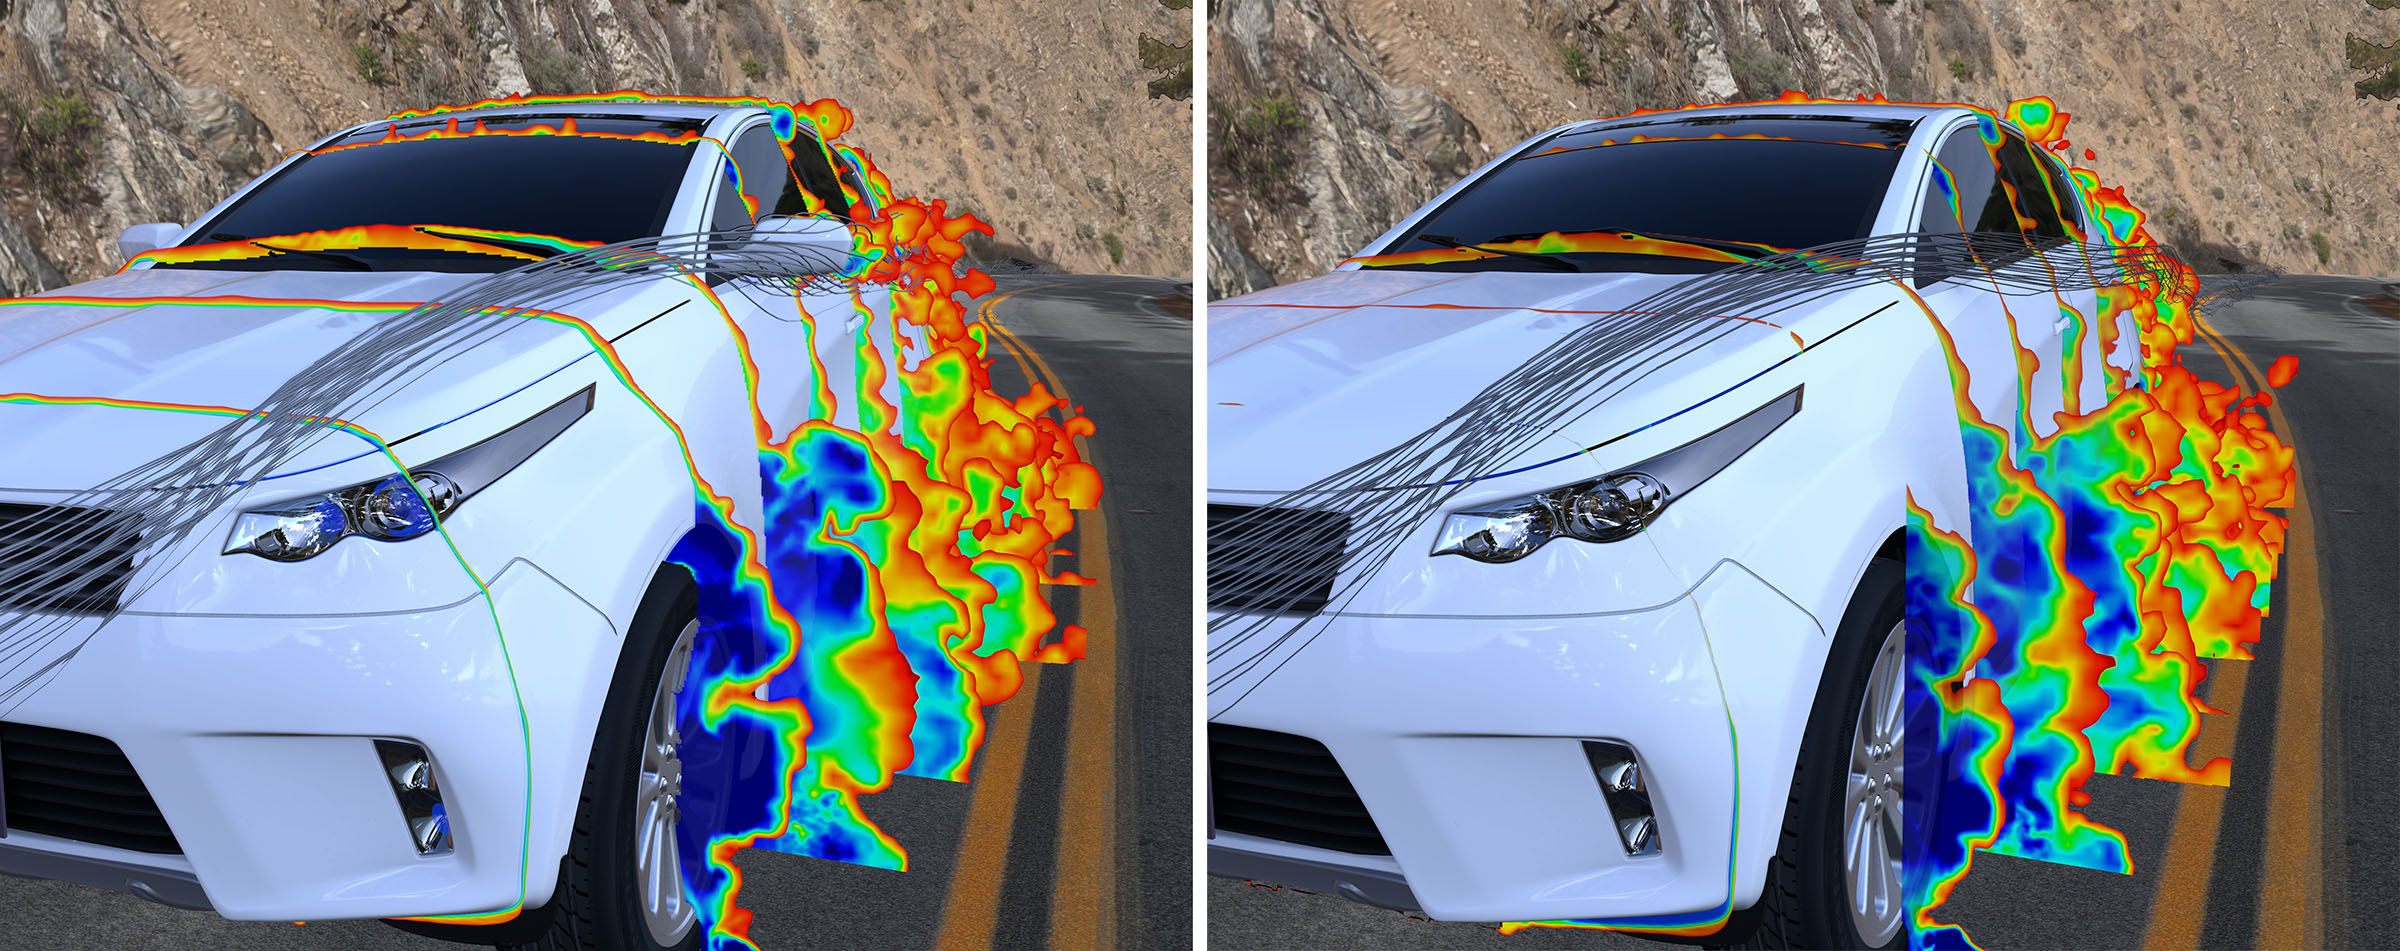 Simulation-driven design is helping world-leading vehicle manufacturers engineer better vehicles today.